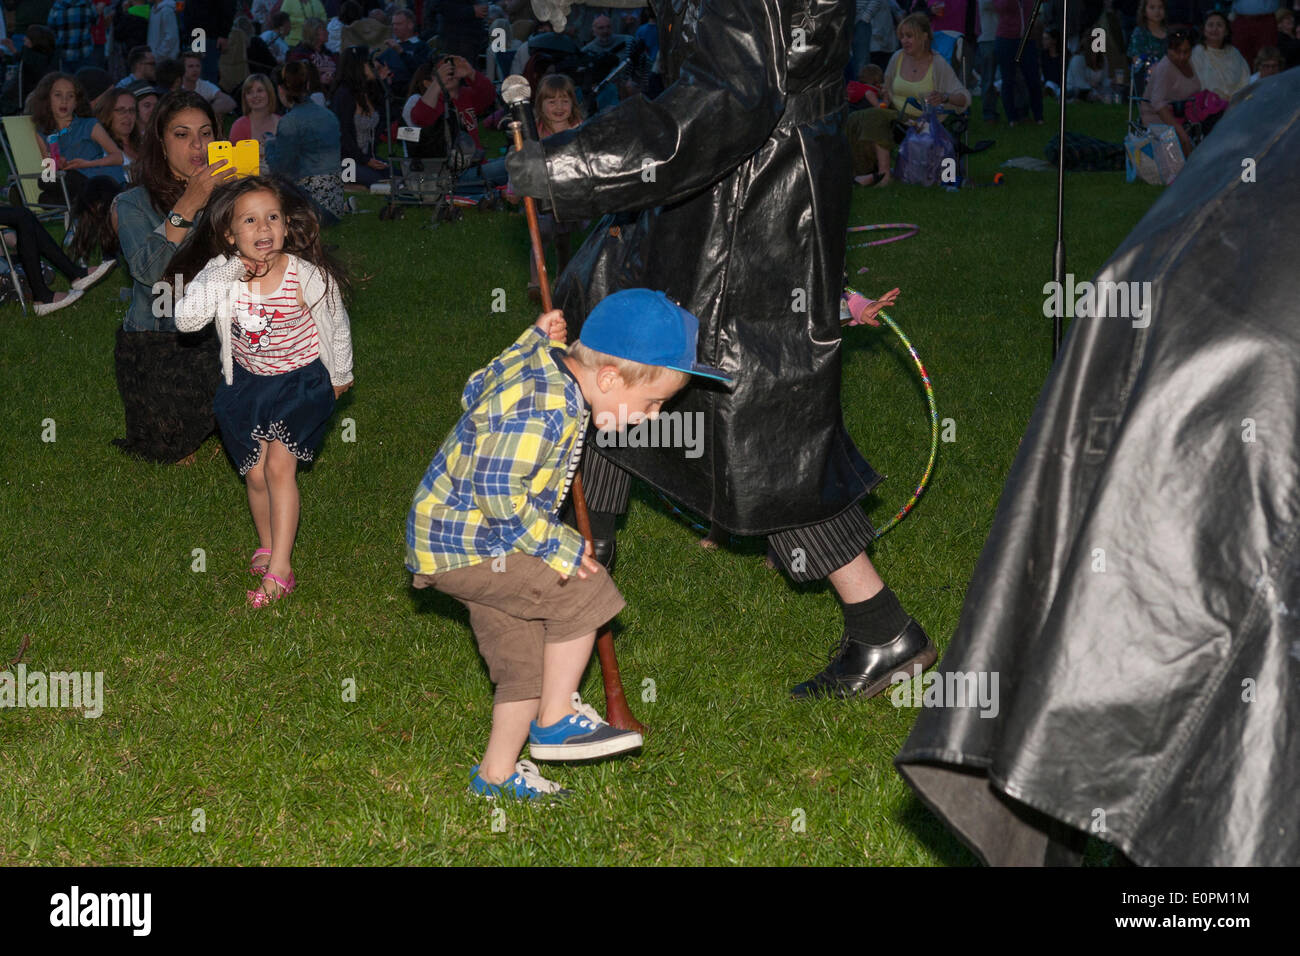 Wye Valley, Chepstow, UK. 18th May 2014. 9pm 19th May 2014 Chepstow. 2014 Wye Valley Festival Finale including street theatre, choirs and fireworks. Credit:  David Broadbent/Alamy Live News Stock Photo